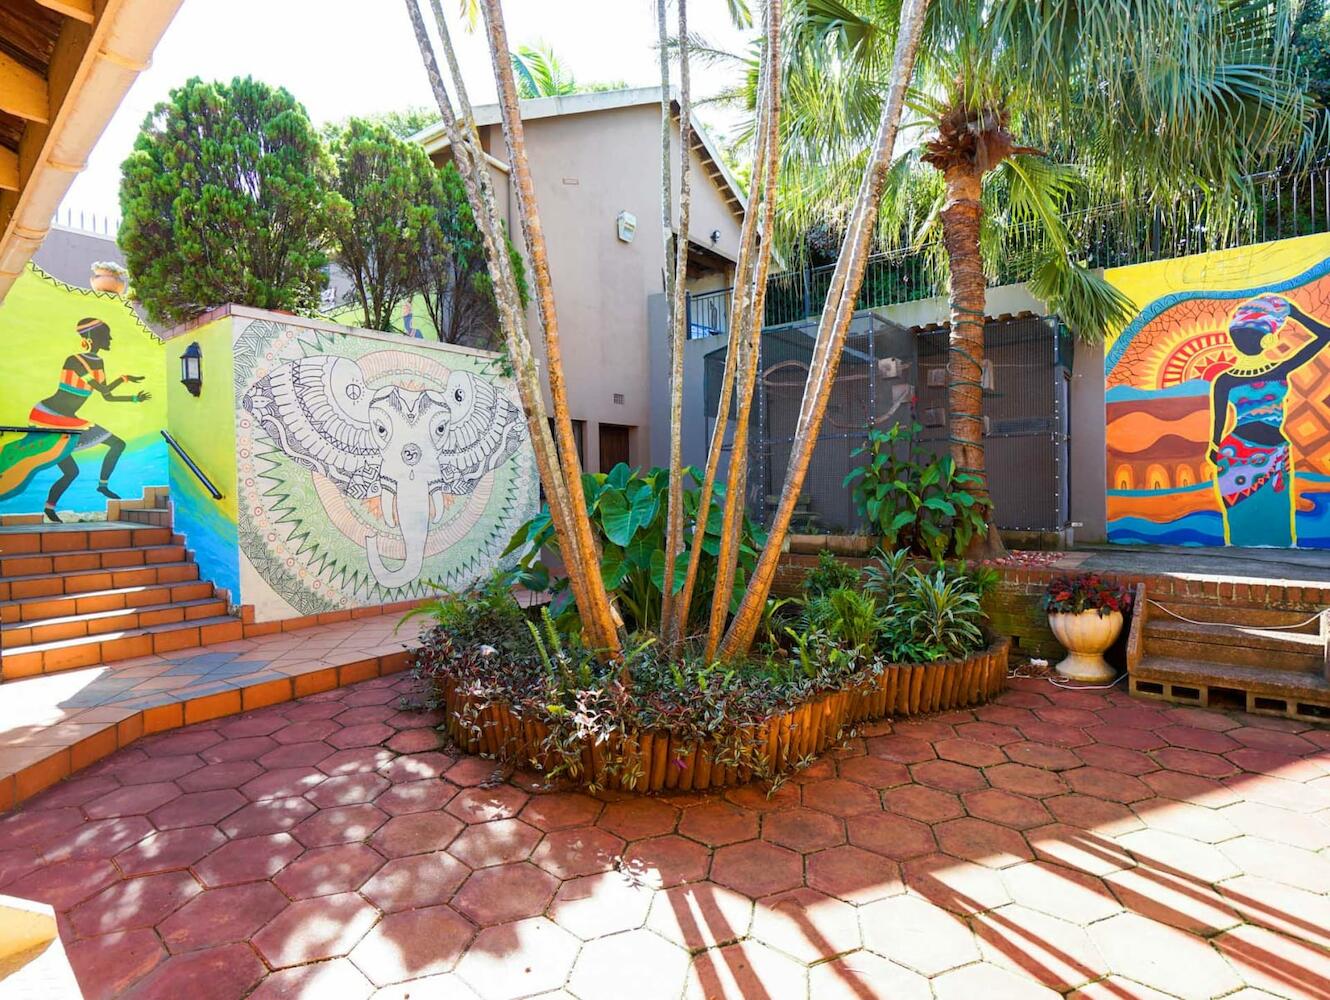 Aweh Africa Backpackers in Durban - Prices 2020 (How to compare?)